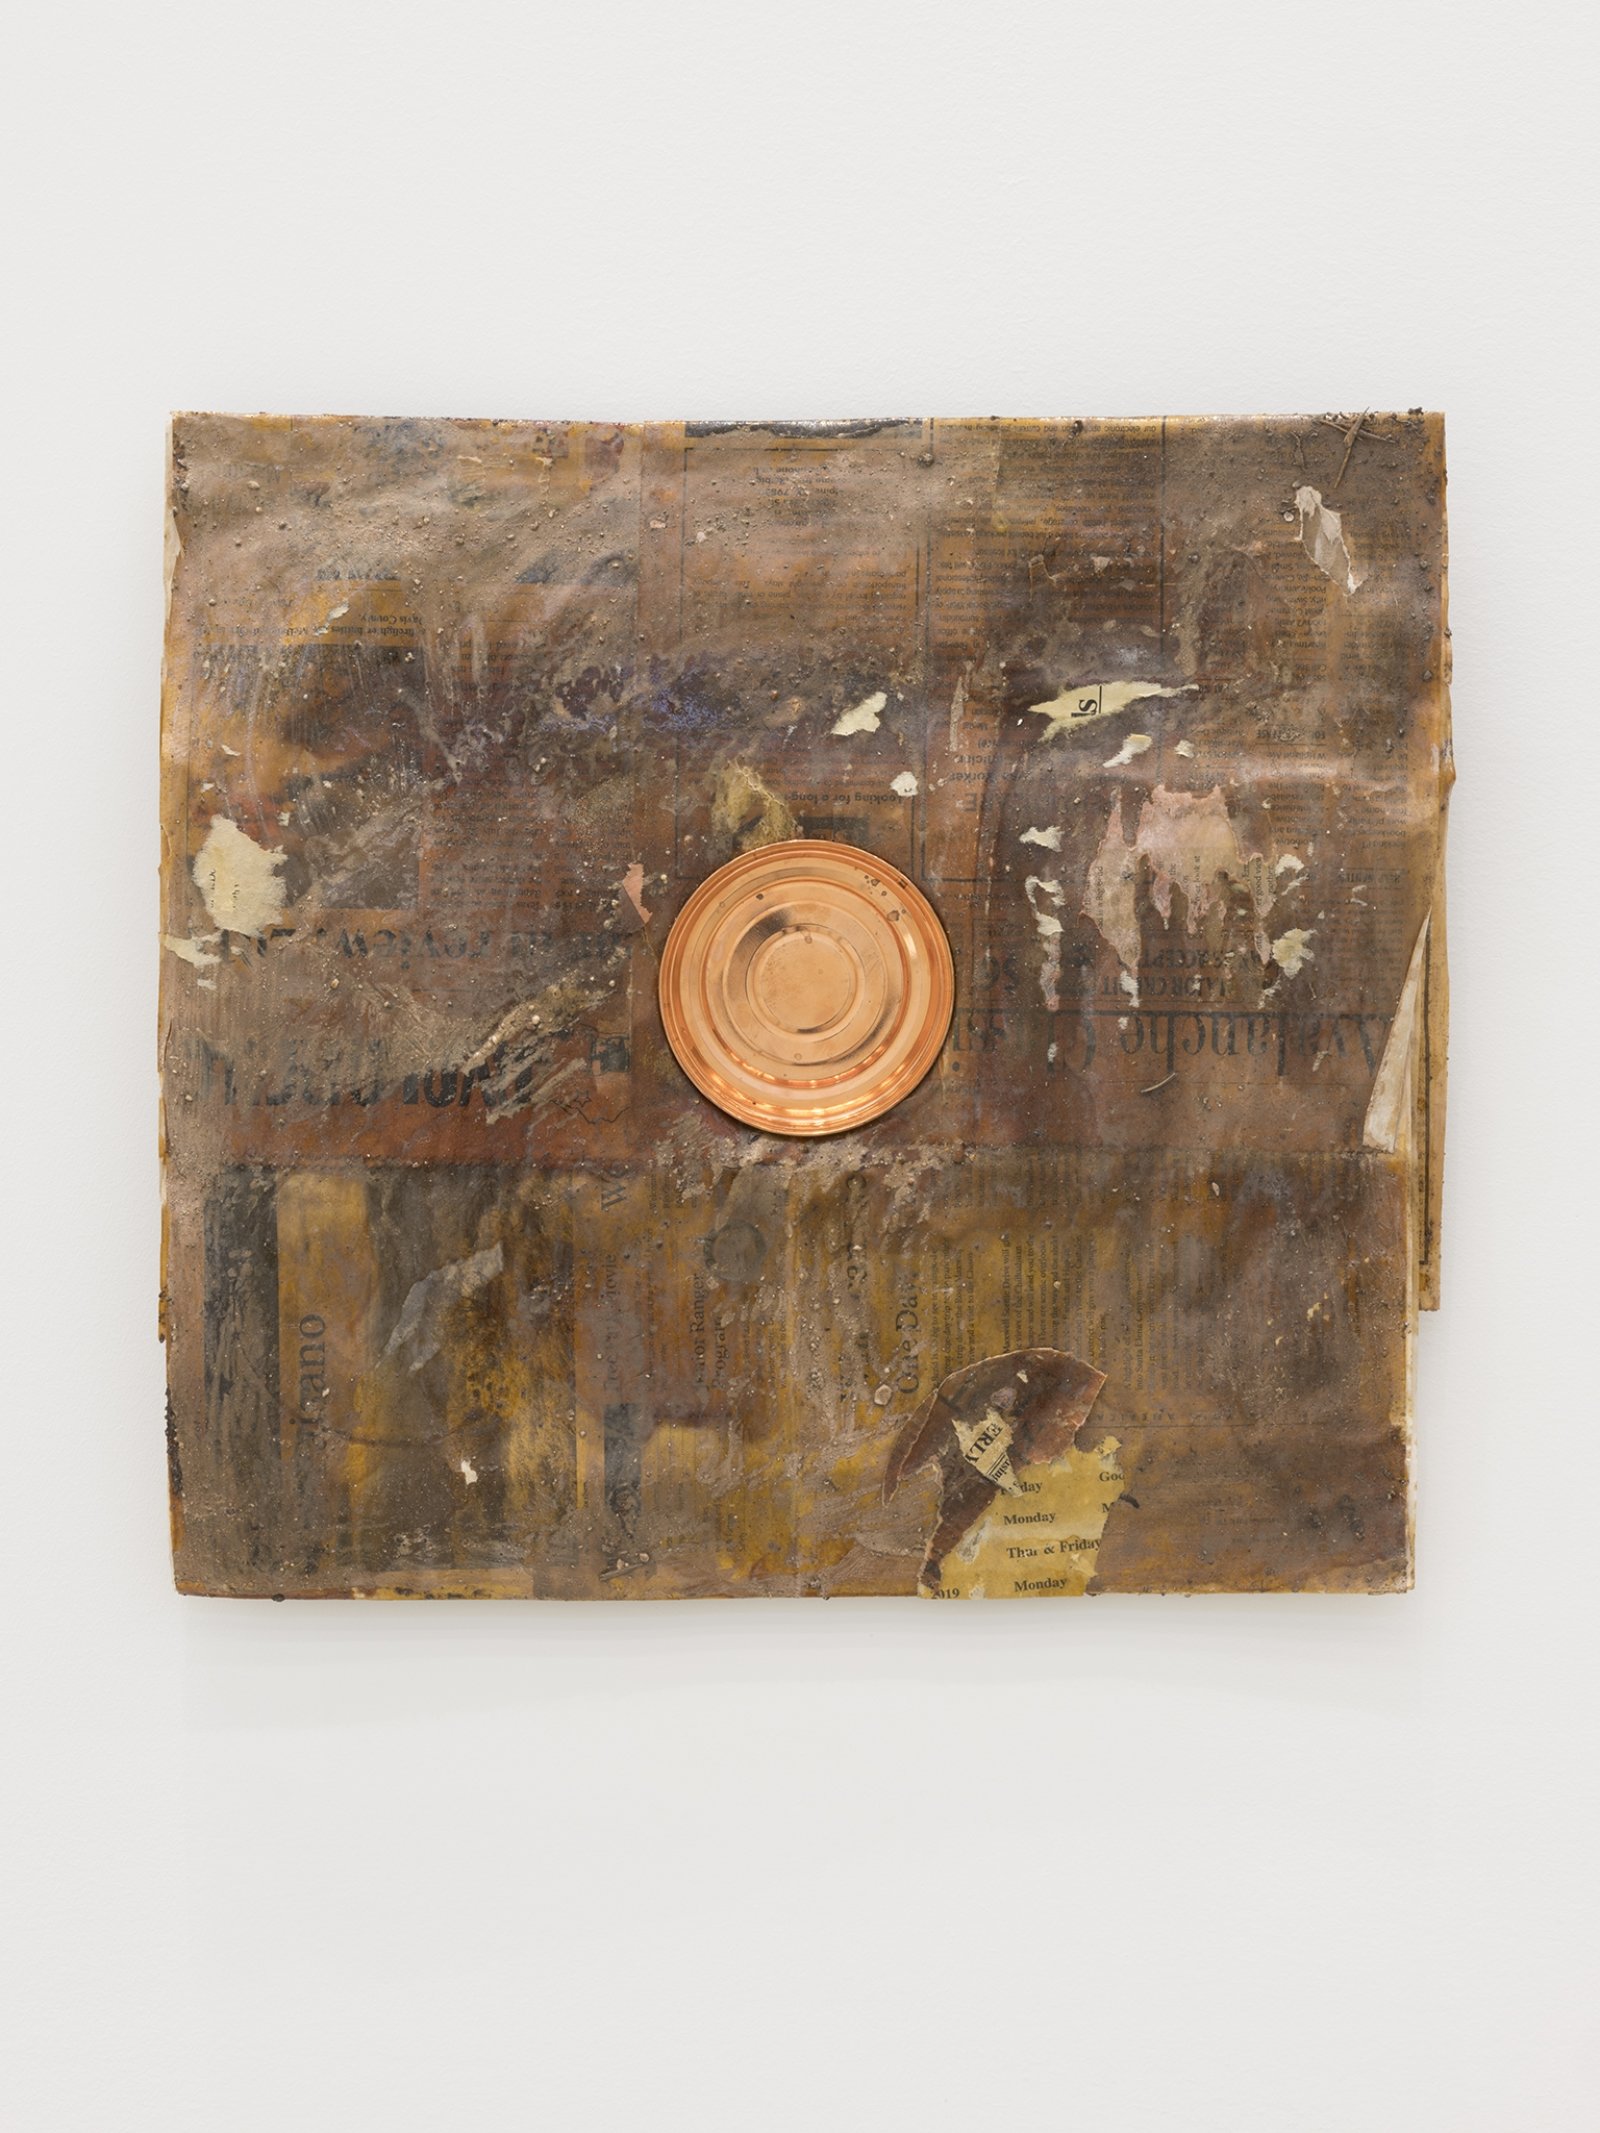 Rochelle Goldberg, Dirty Wall, 2019, newsprint, shellac, copperplated can, dirt from the river, 16 x 18 in. (41 x 45 cm)